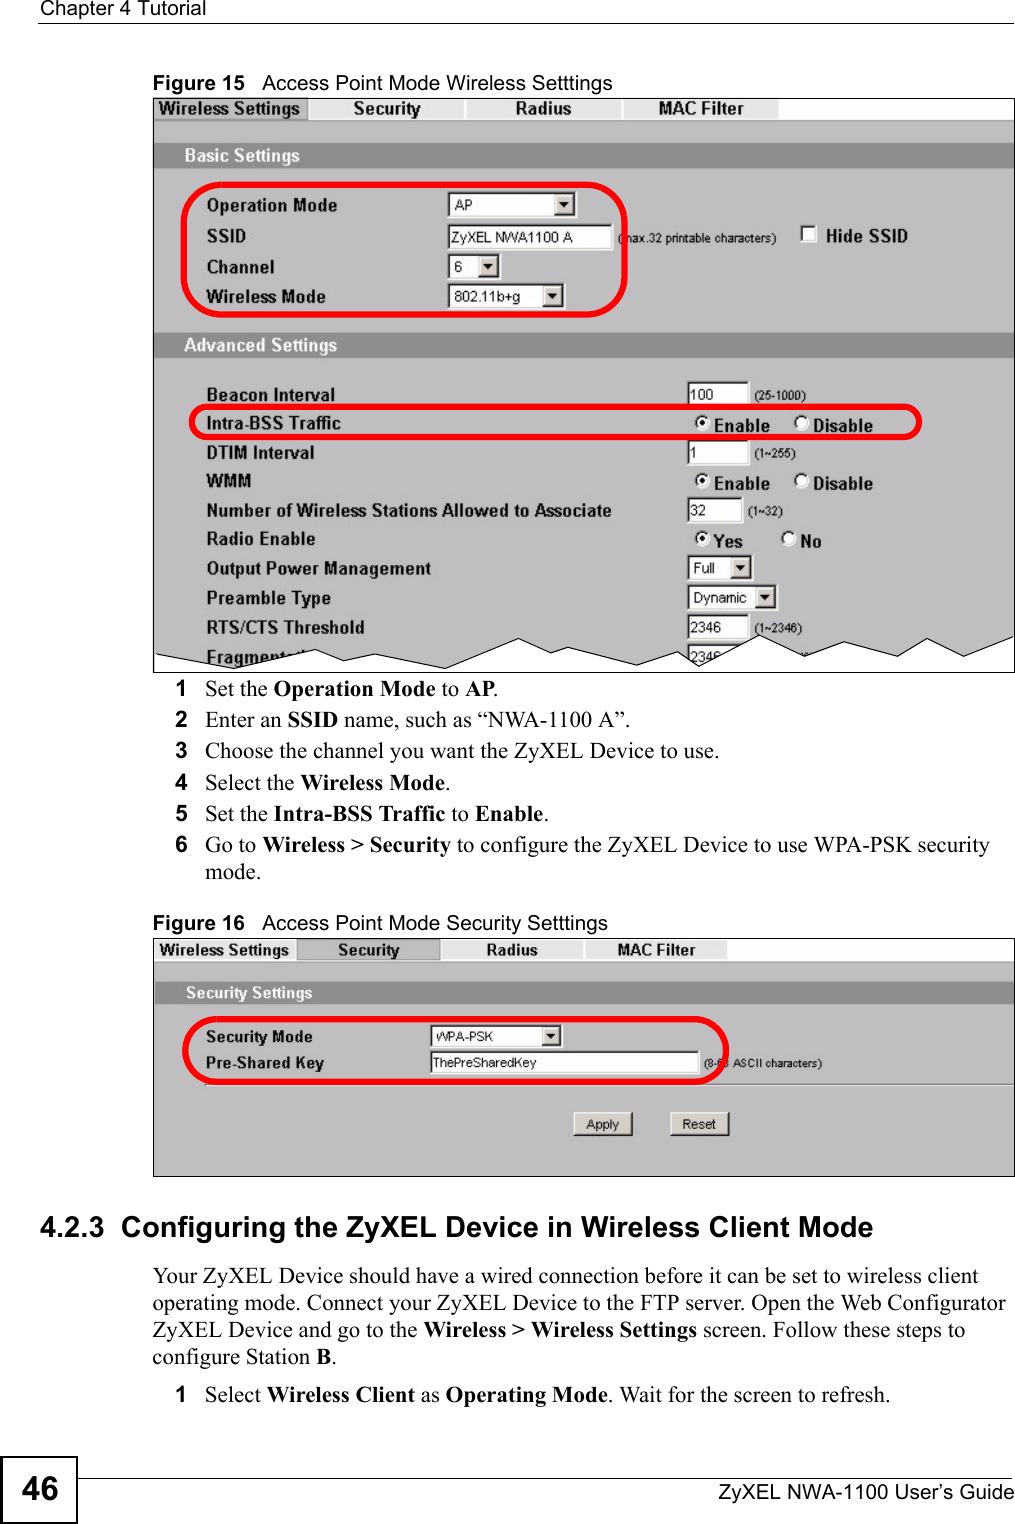 Chapter 4 TutorialZyXEL NWA-1100 User’s Guide46Figure 15   Access Point Mode Wireless Setttings1Set the Operation Mode to AP.2Enter an SSID name, such as “NWA-1100 A”. 3Choose the channel you want the ZyXEL Device to use.4Select the Wireless Mode.5Set the Intra-BSS Traffic to Enable.6Go to Wireless &gt; Security to configure the ZyXEL Device to use WPA-PSK security mode. Figure 16   Access Point Mode Security Setttings4.2.3  Configuring the ZyXEL Device in Wireless Client ModeYour ZyXEL Device should have a wired connection before it can be set to wireless client operating mode. Connect your ZyXEL Device to the FTP server. Open the Web Configurator ZyXEL Device and go to the Wireless &gt; Wireless Settings screen. Follow these steps to configure Station B.1Select Wireless Client as Operating Mode. Wait for the screen to refresh.